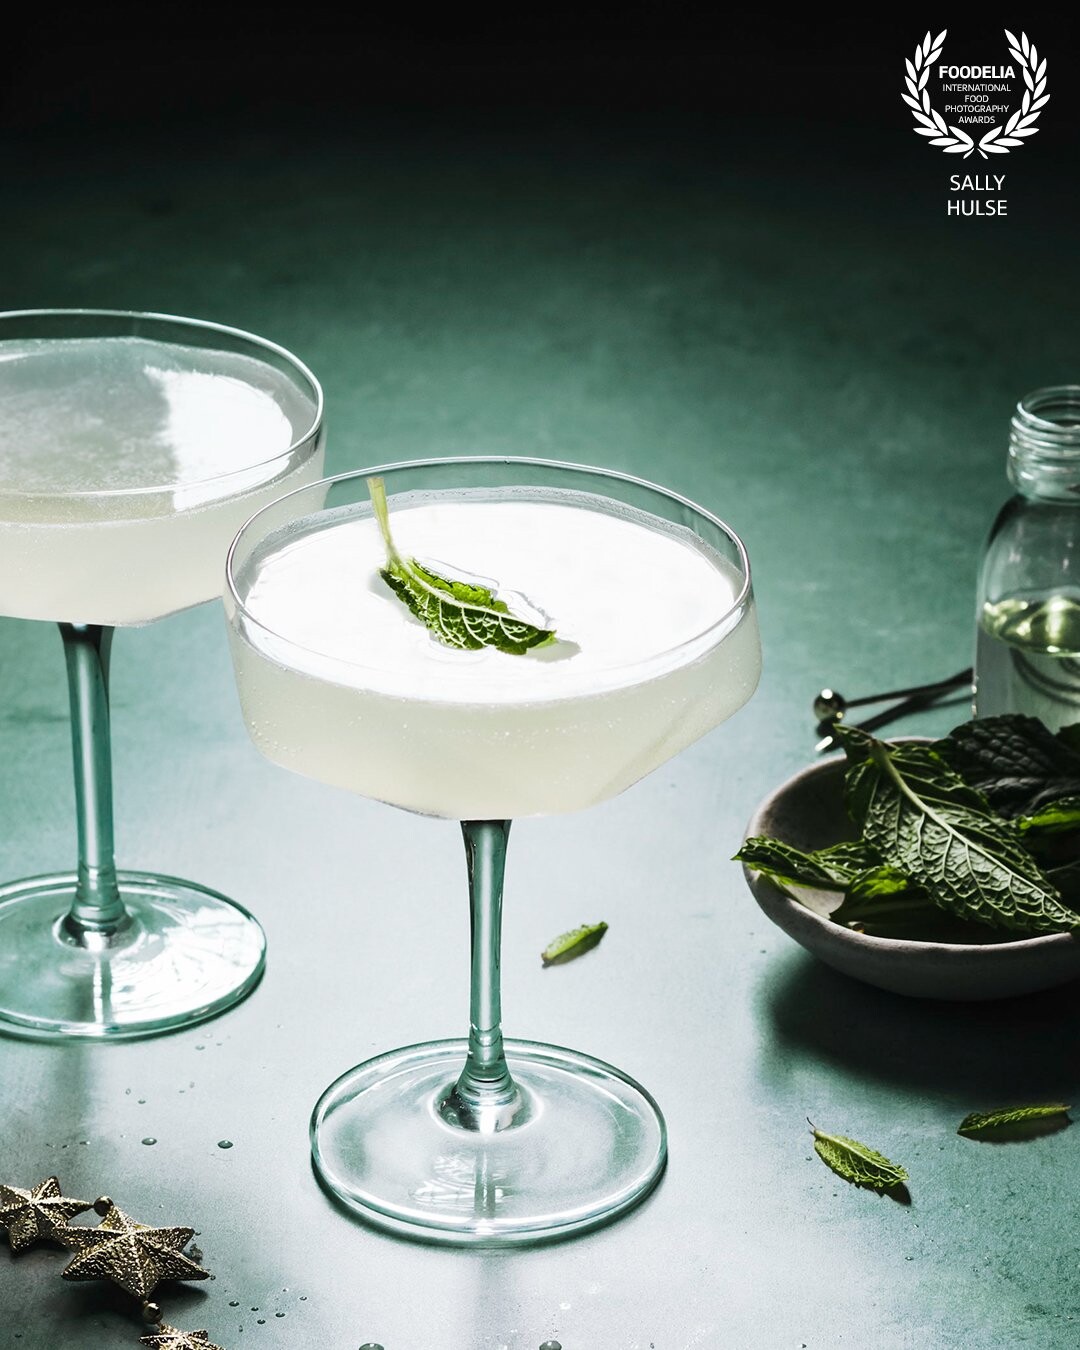 Christmas Mint Gimlets. <br />
I love dark and bright images with a whole lot of mood and drama, and I wanted to go for that here. I stuck with a monochromatic colour scheme and minimalistic composition to really let the drink shine.